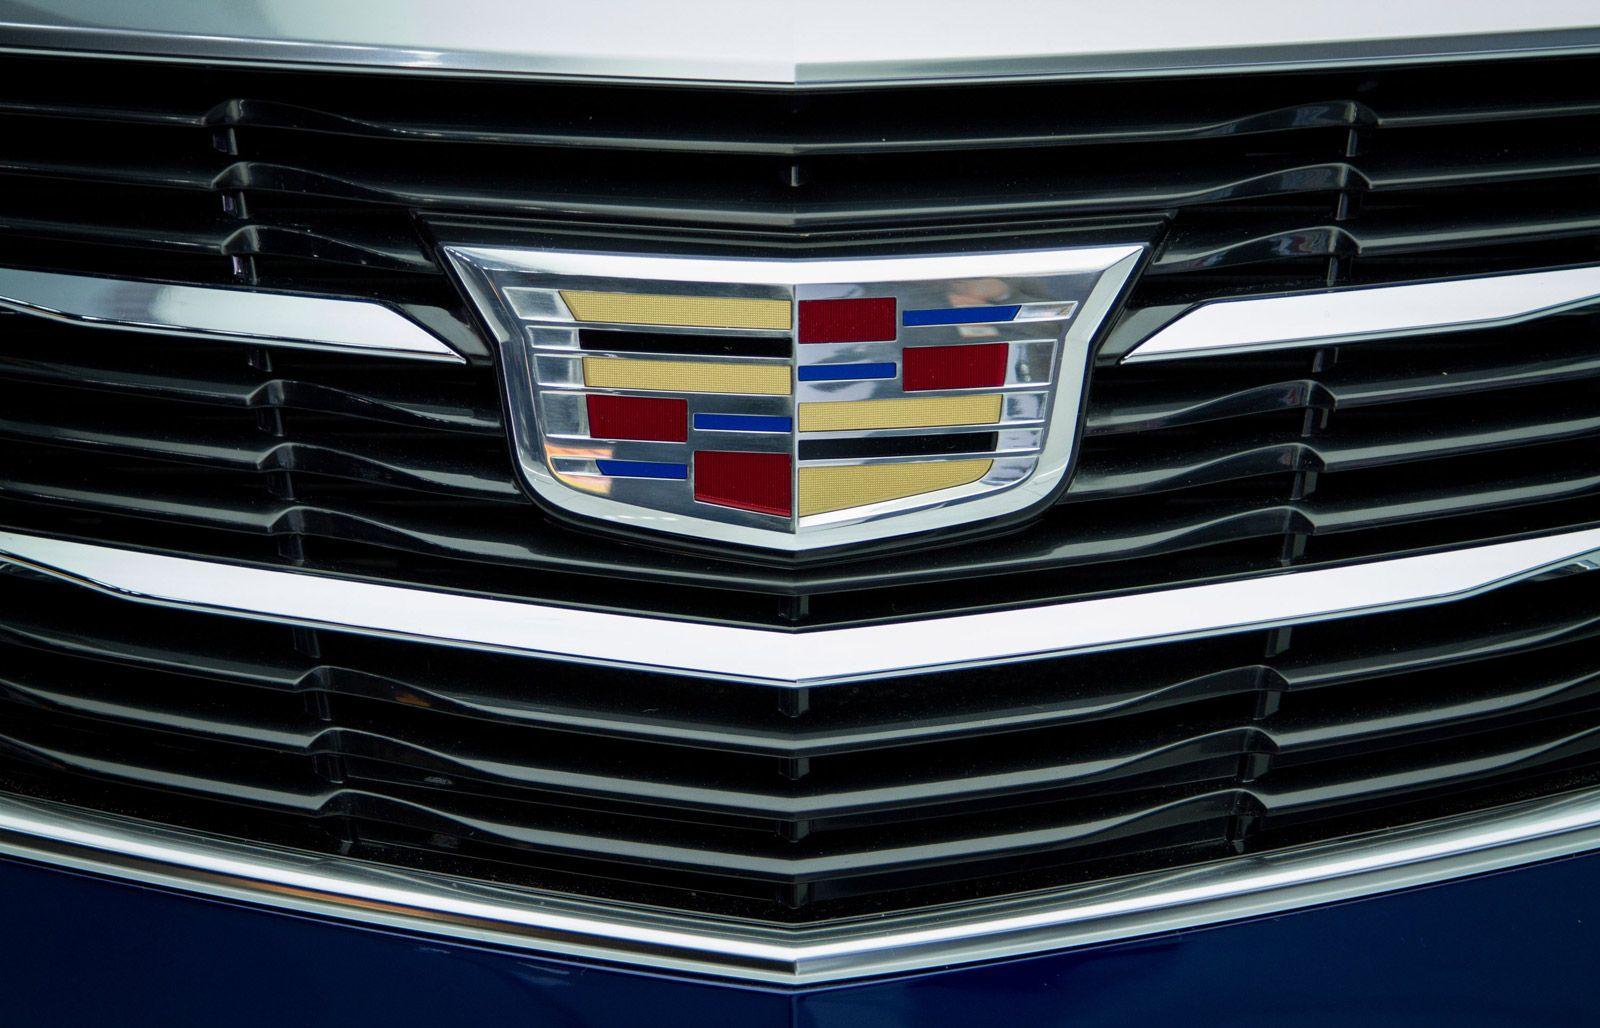 Cadillac Logo - Cadillac Explains Why It Dropped The Laurel Wreaths From Its Logo